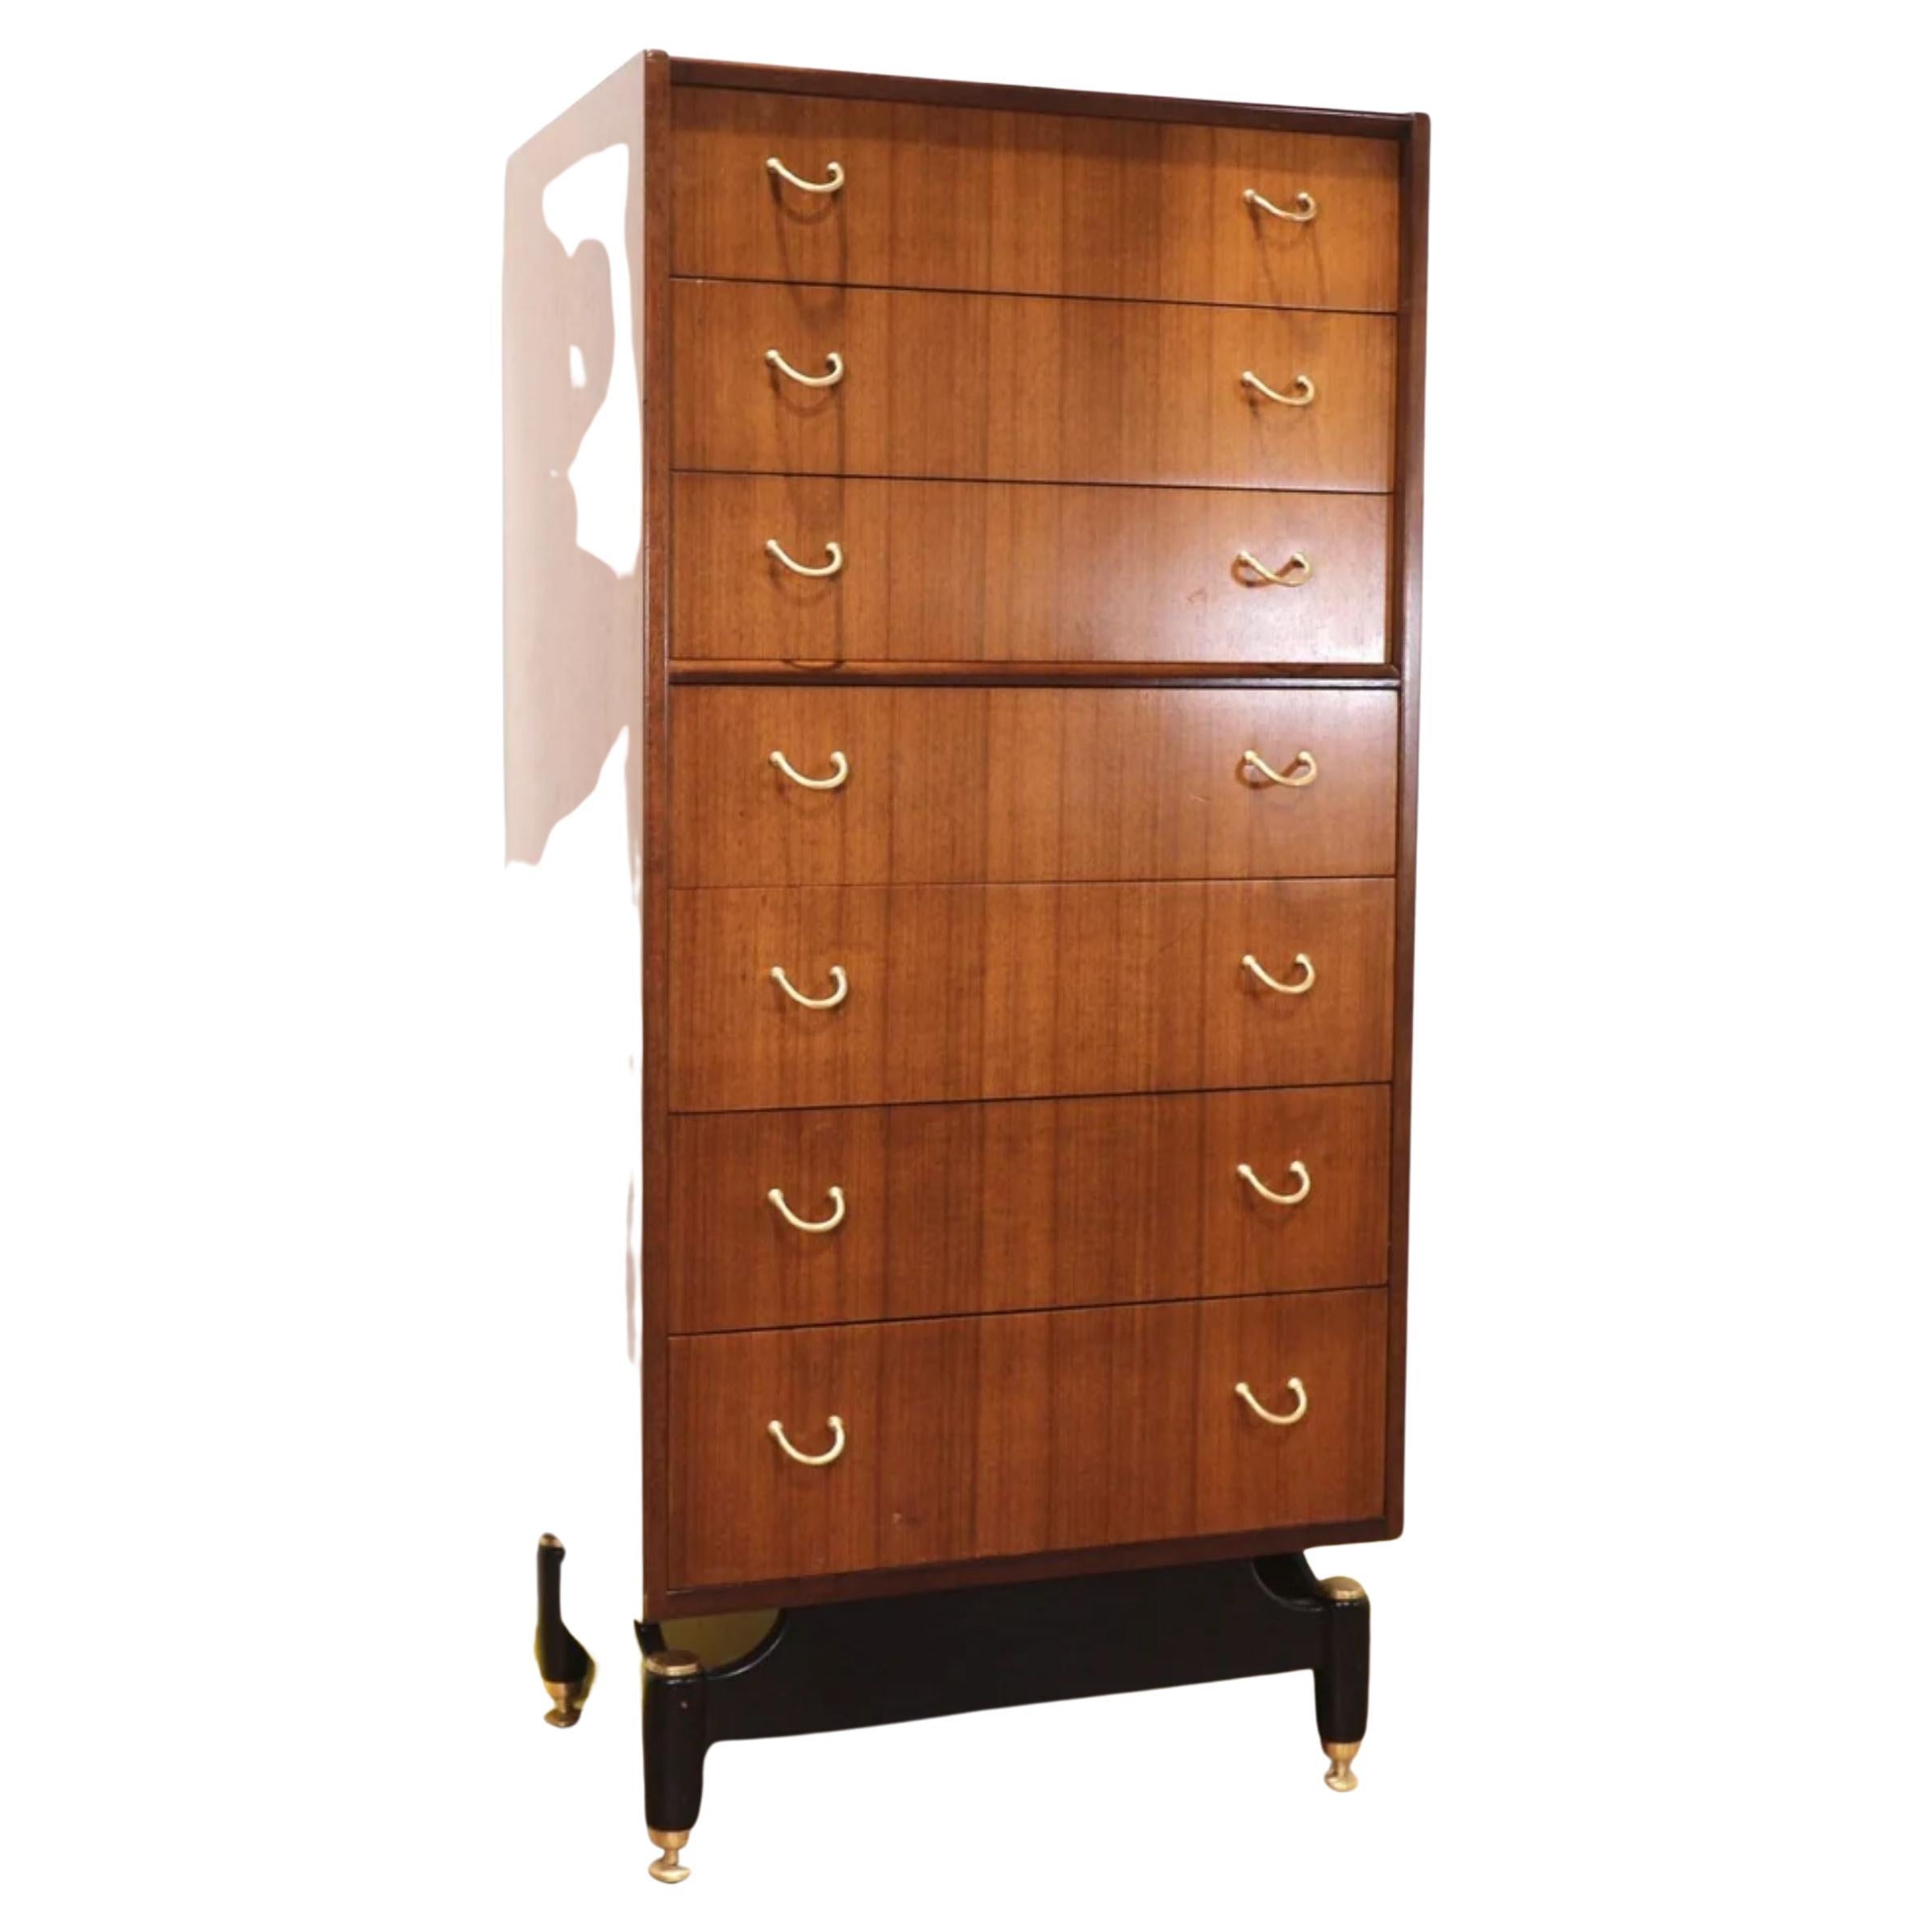 A stunning Mid-Century Italian style Tola Librenza tallboy dresser of 7 drawers by E Gomme (G Plan) on black plinth/legs with polished brass caps, adjustable brass riser feet & ergonomic curved brass handles

Dimensions

Width 24 depth 16 height